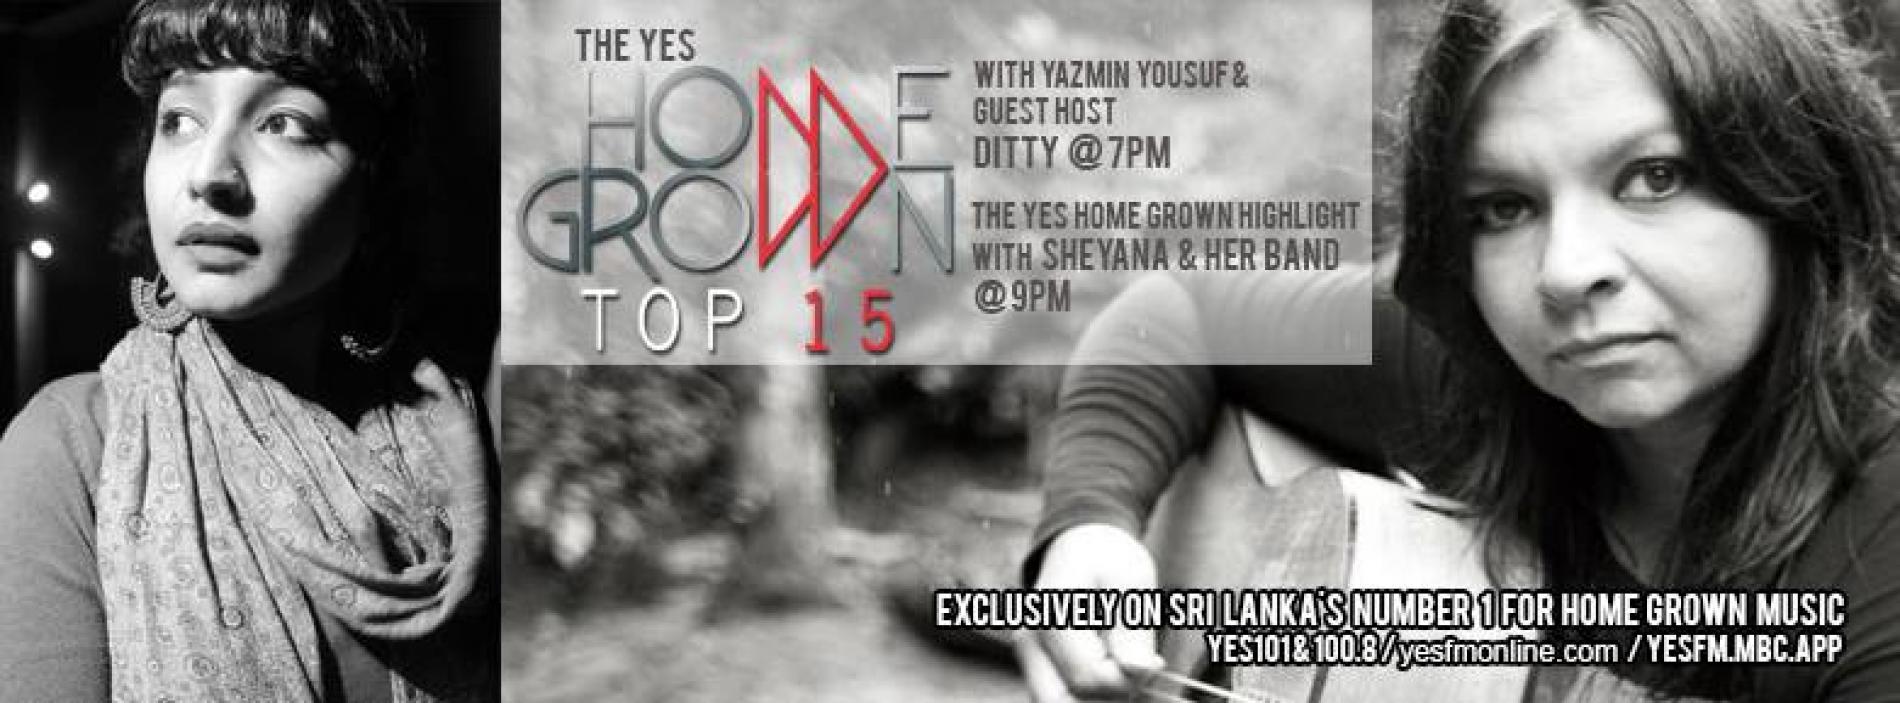 Ditty & The Sheyana Band On The YES Home Grown Top 15